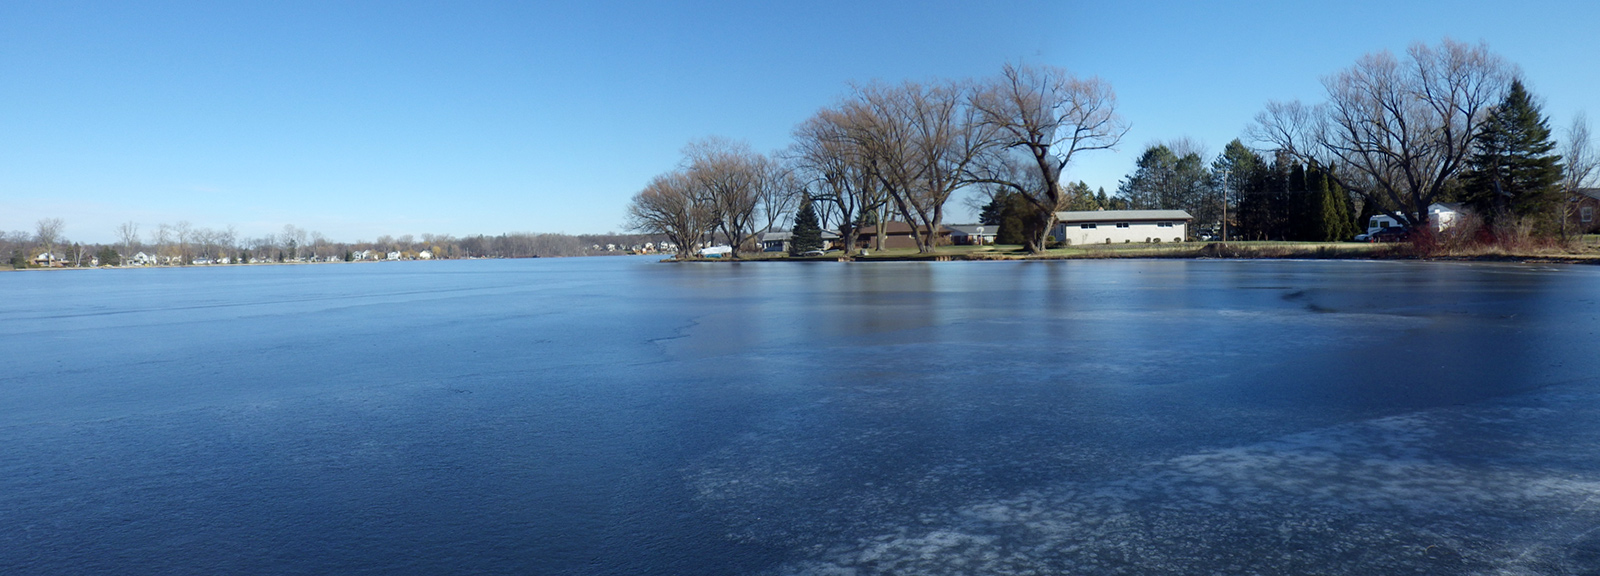 North Commerce Lake. Jan 16, 2013. To skate to the opposite point,  click here. (32 MB video)